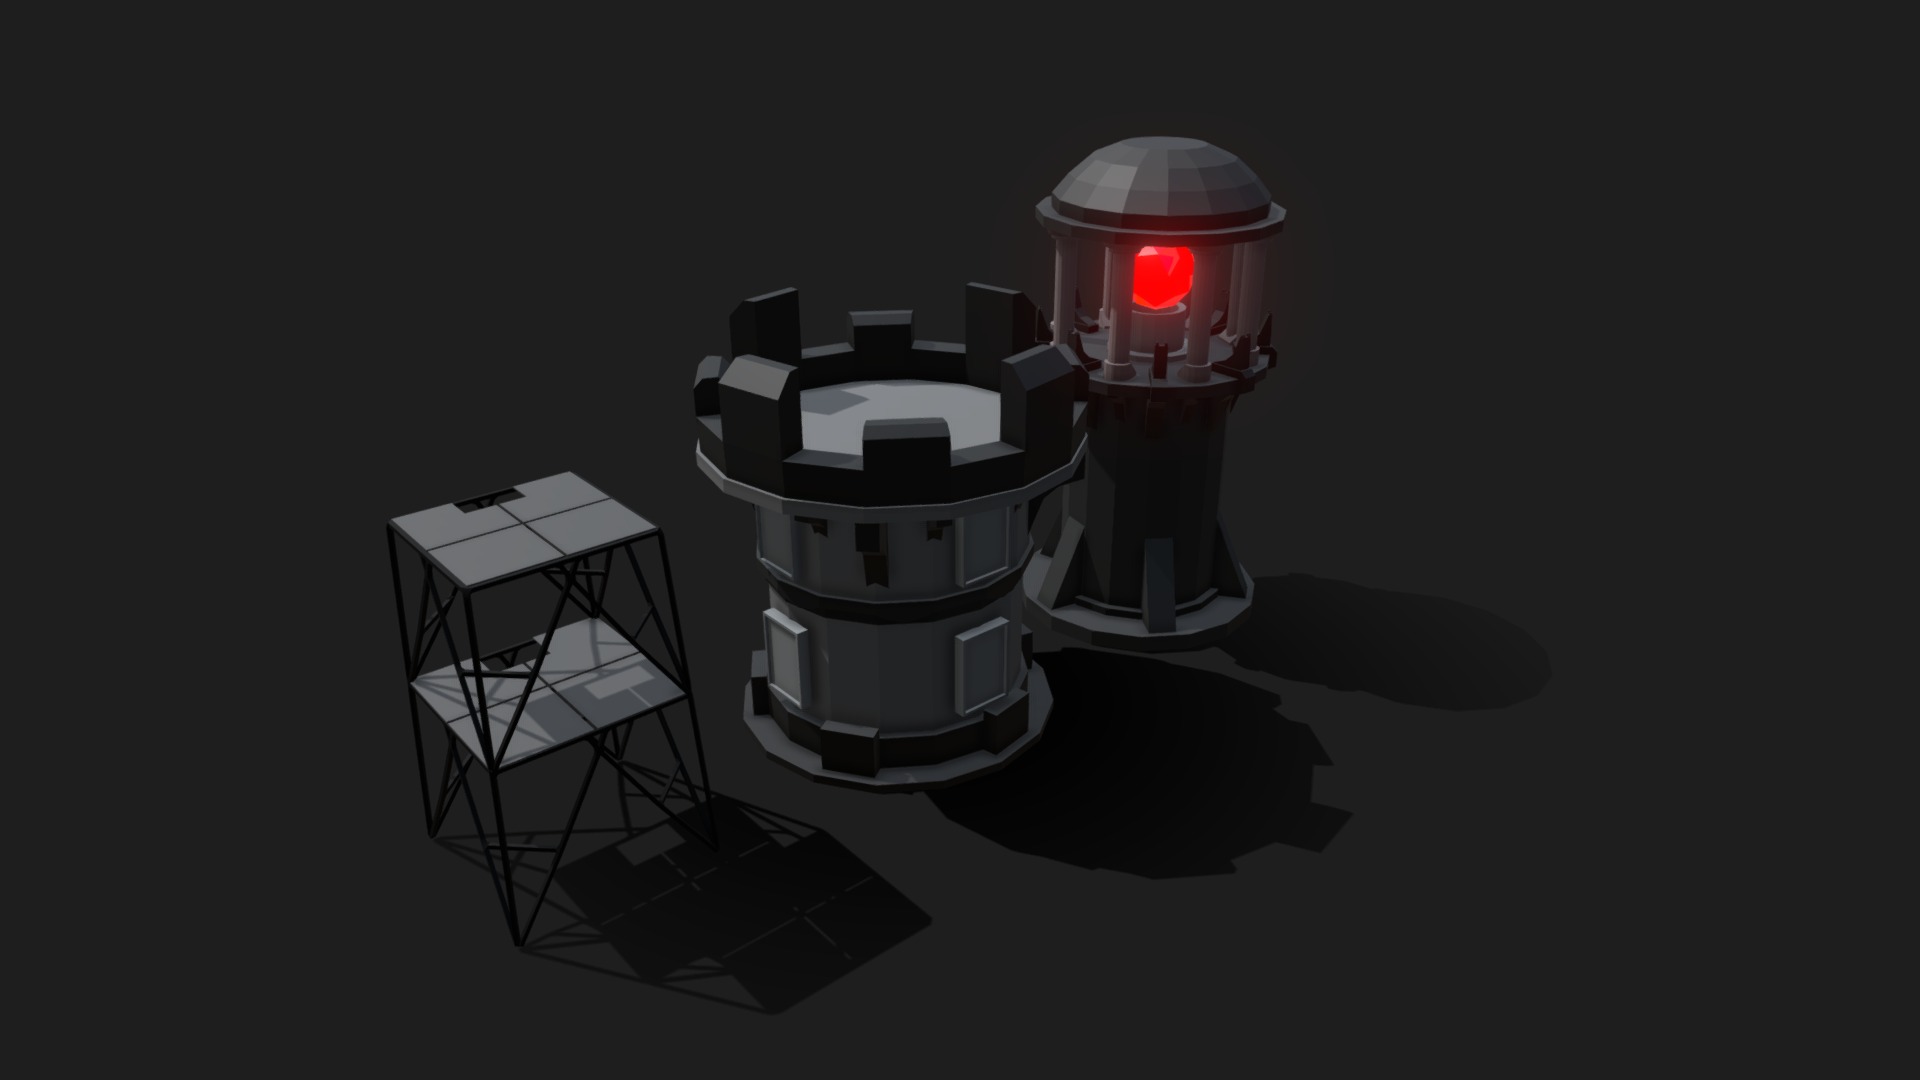 3D model Low poly buildings - This is a 3D model of the Low poly buildings. The 3D model is about a robot with a red light.